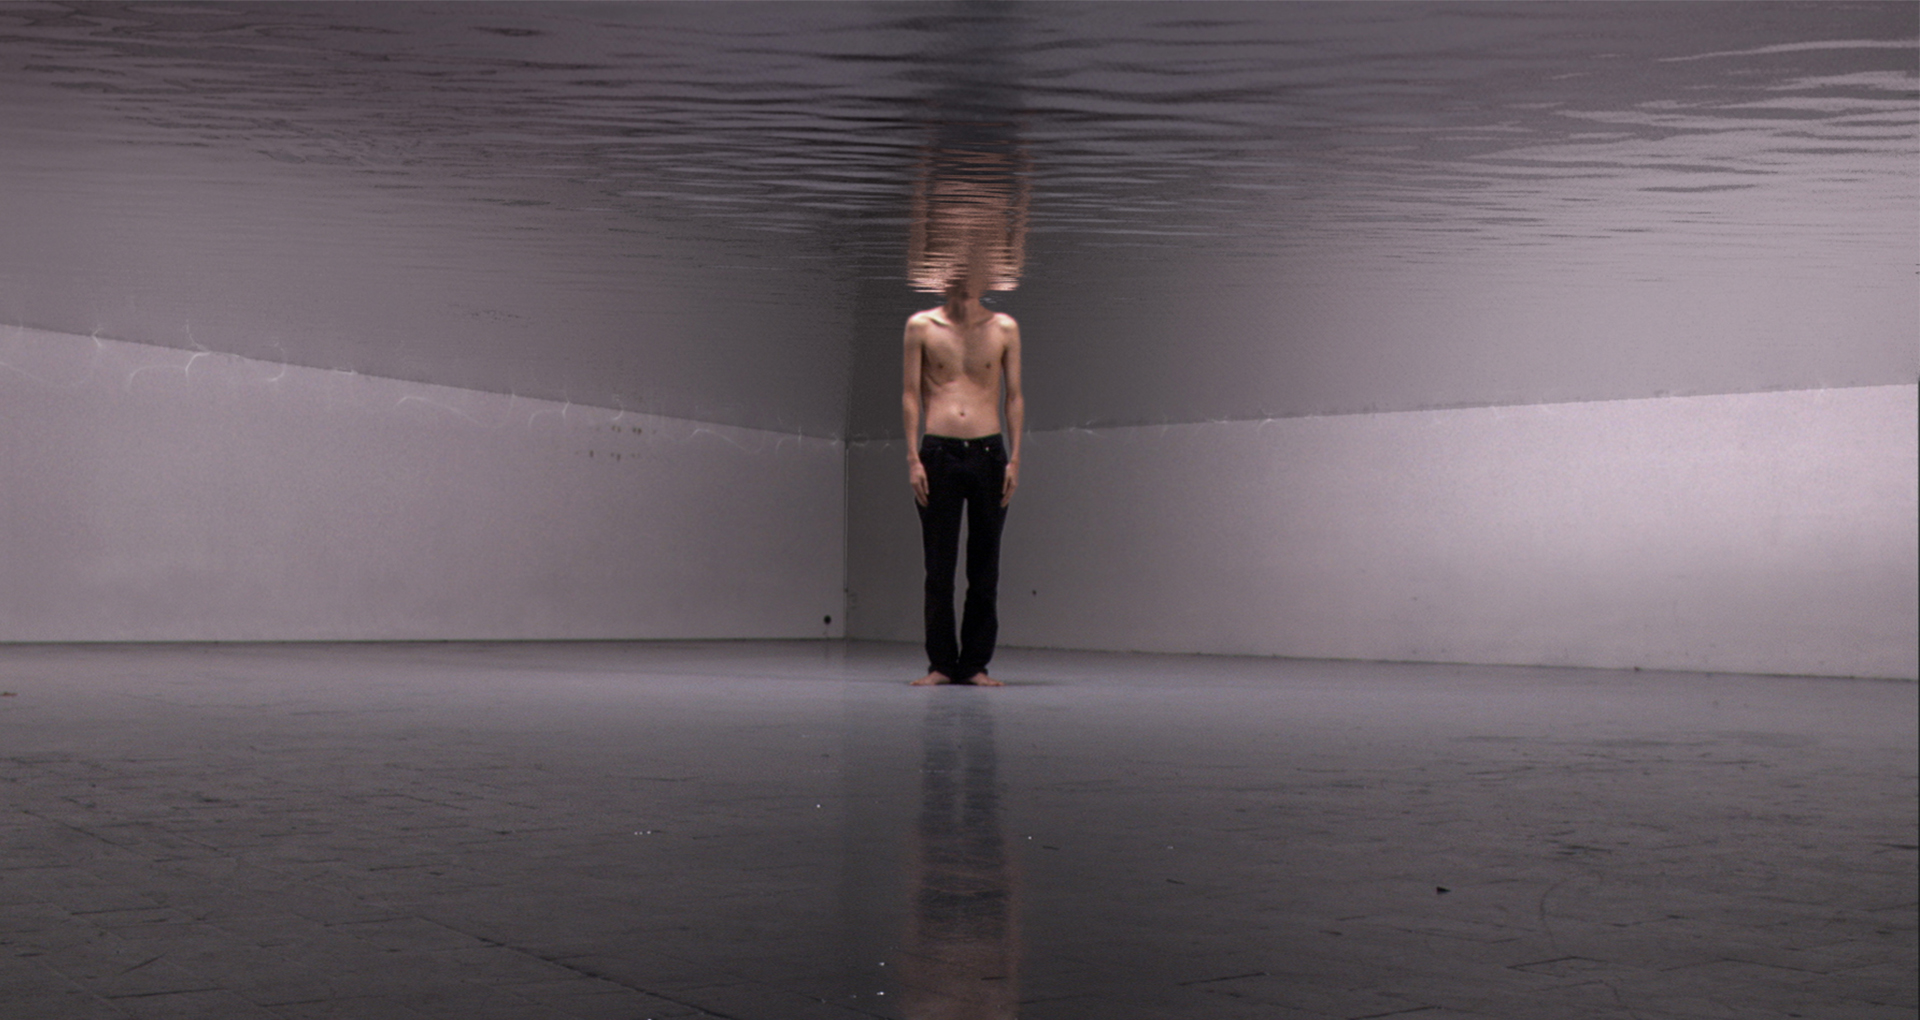 Video montage. A man standing shirtless with black pants in the middle of a room. The upper half of the room is immersed in the water and the character's head too.